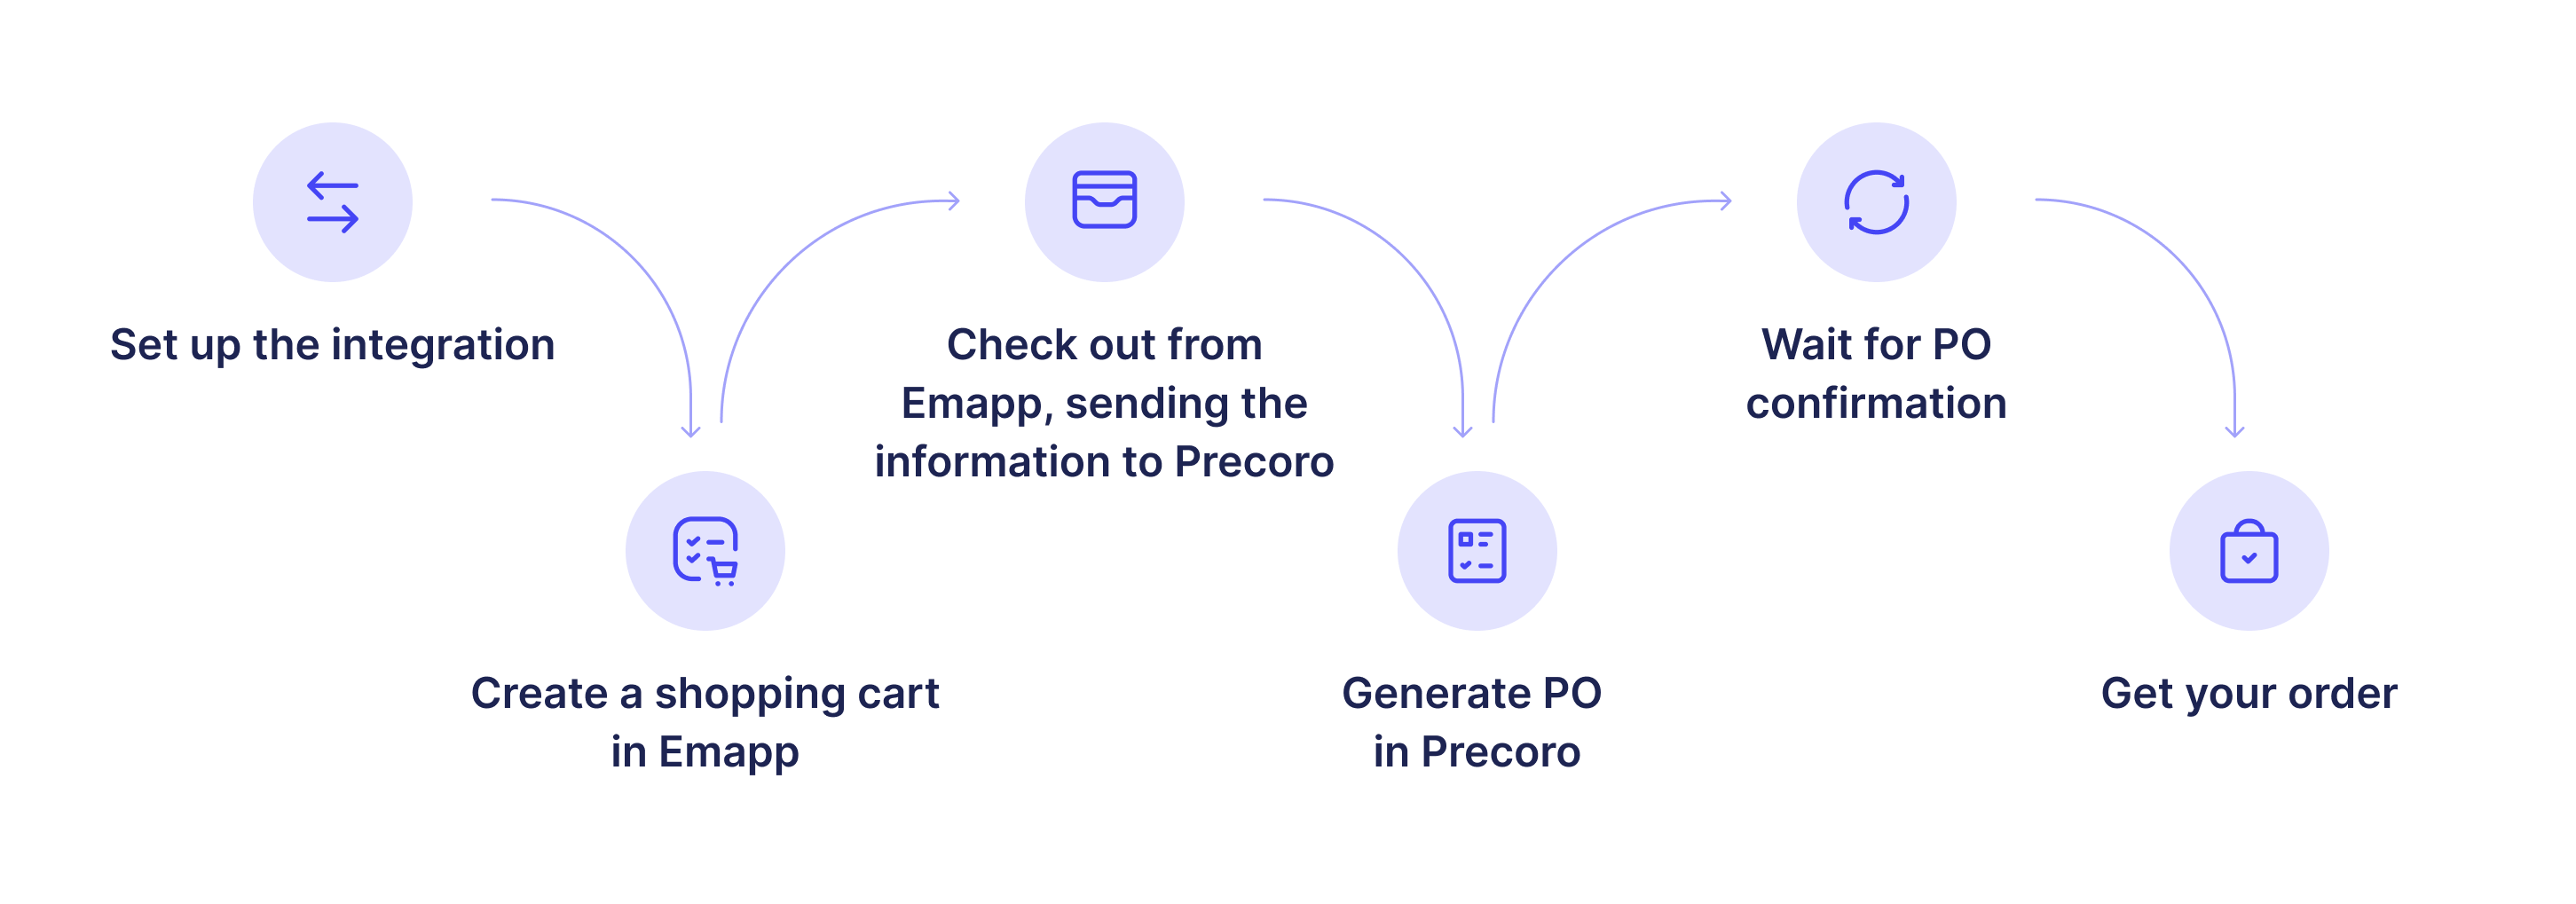 how to use emapp marketplace and precoro together